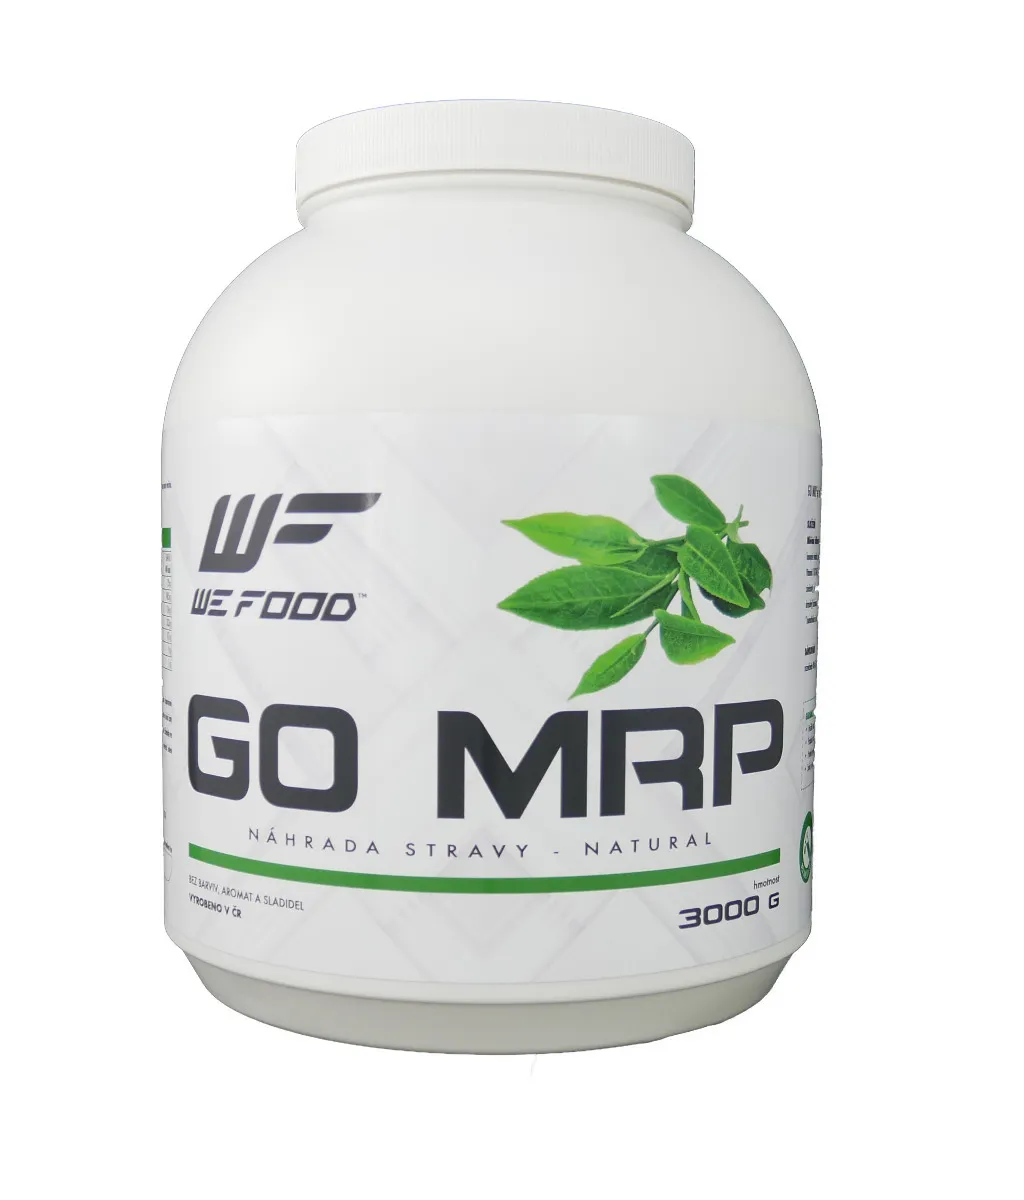 WeFood GO MRP natural